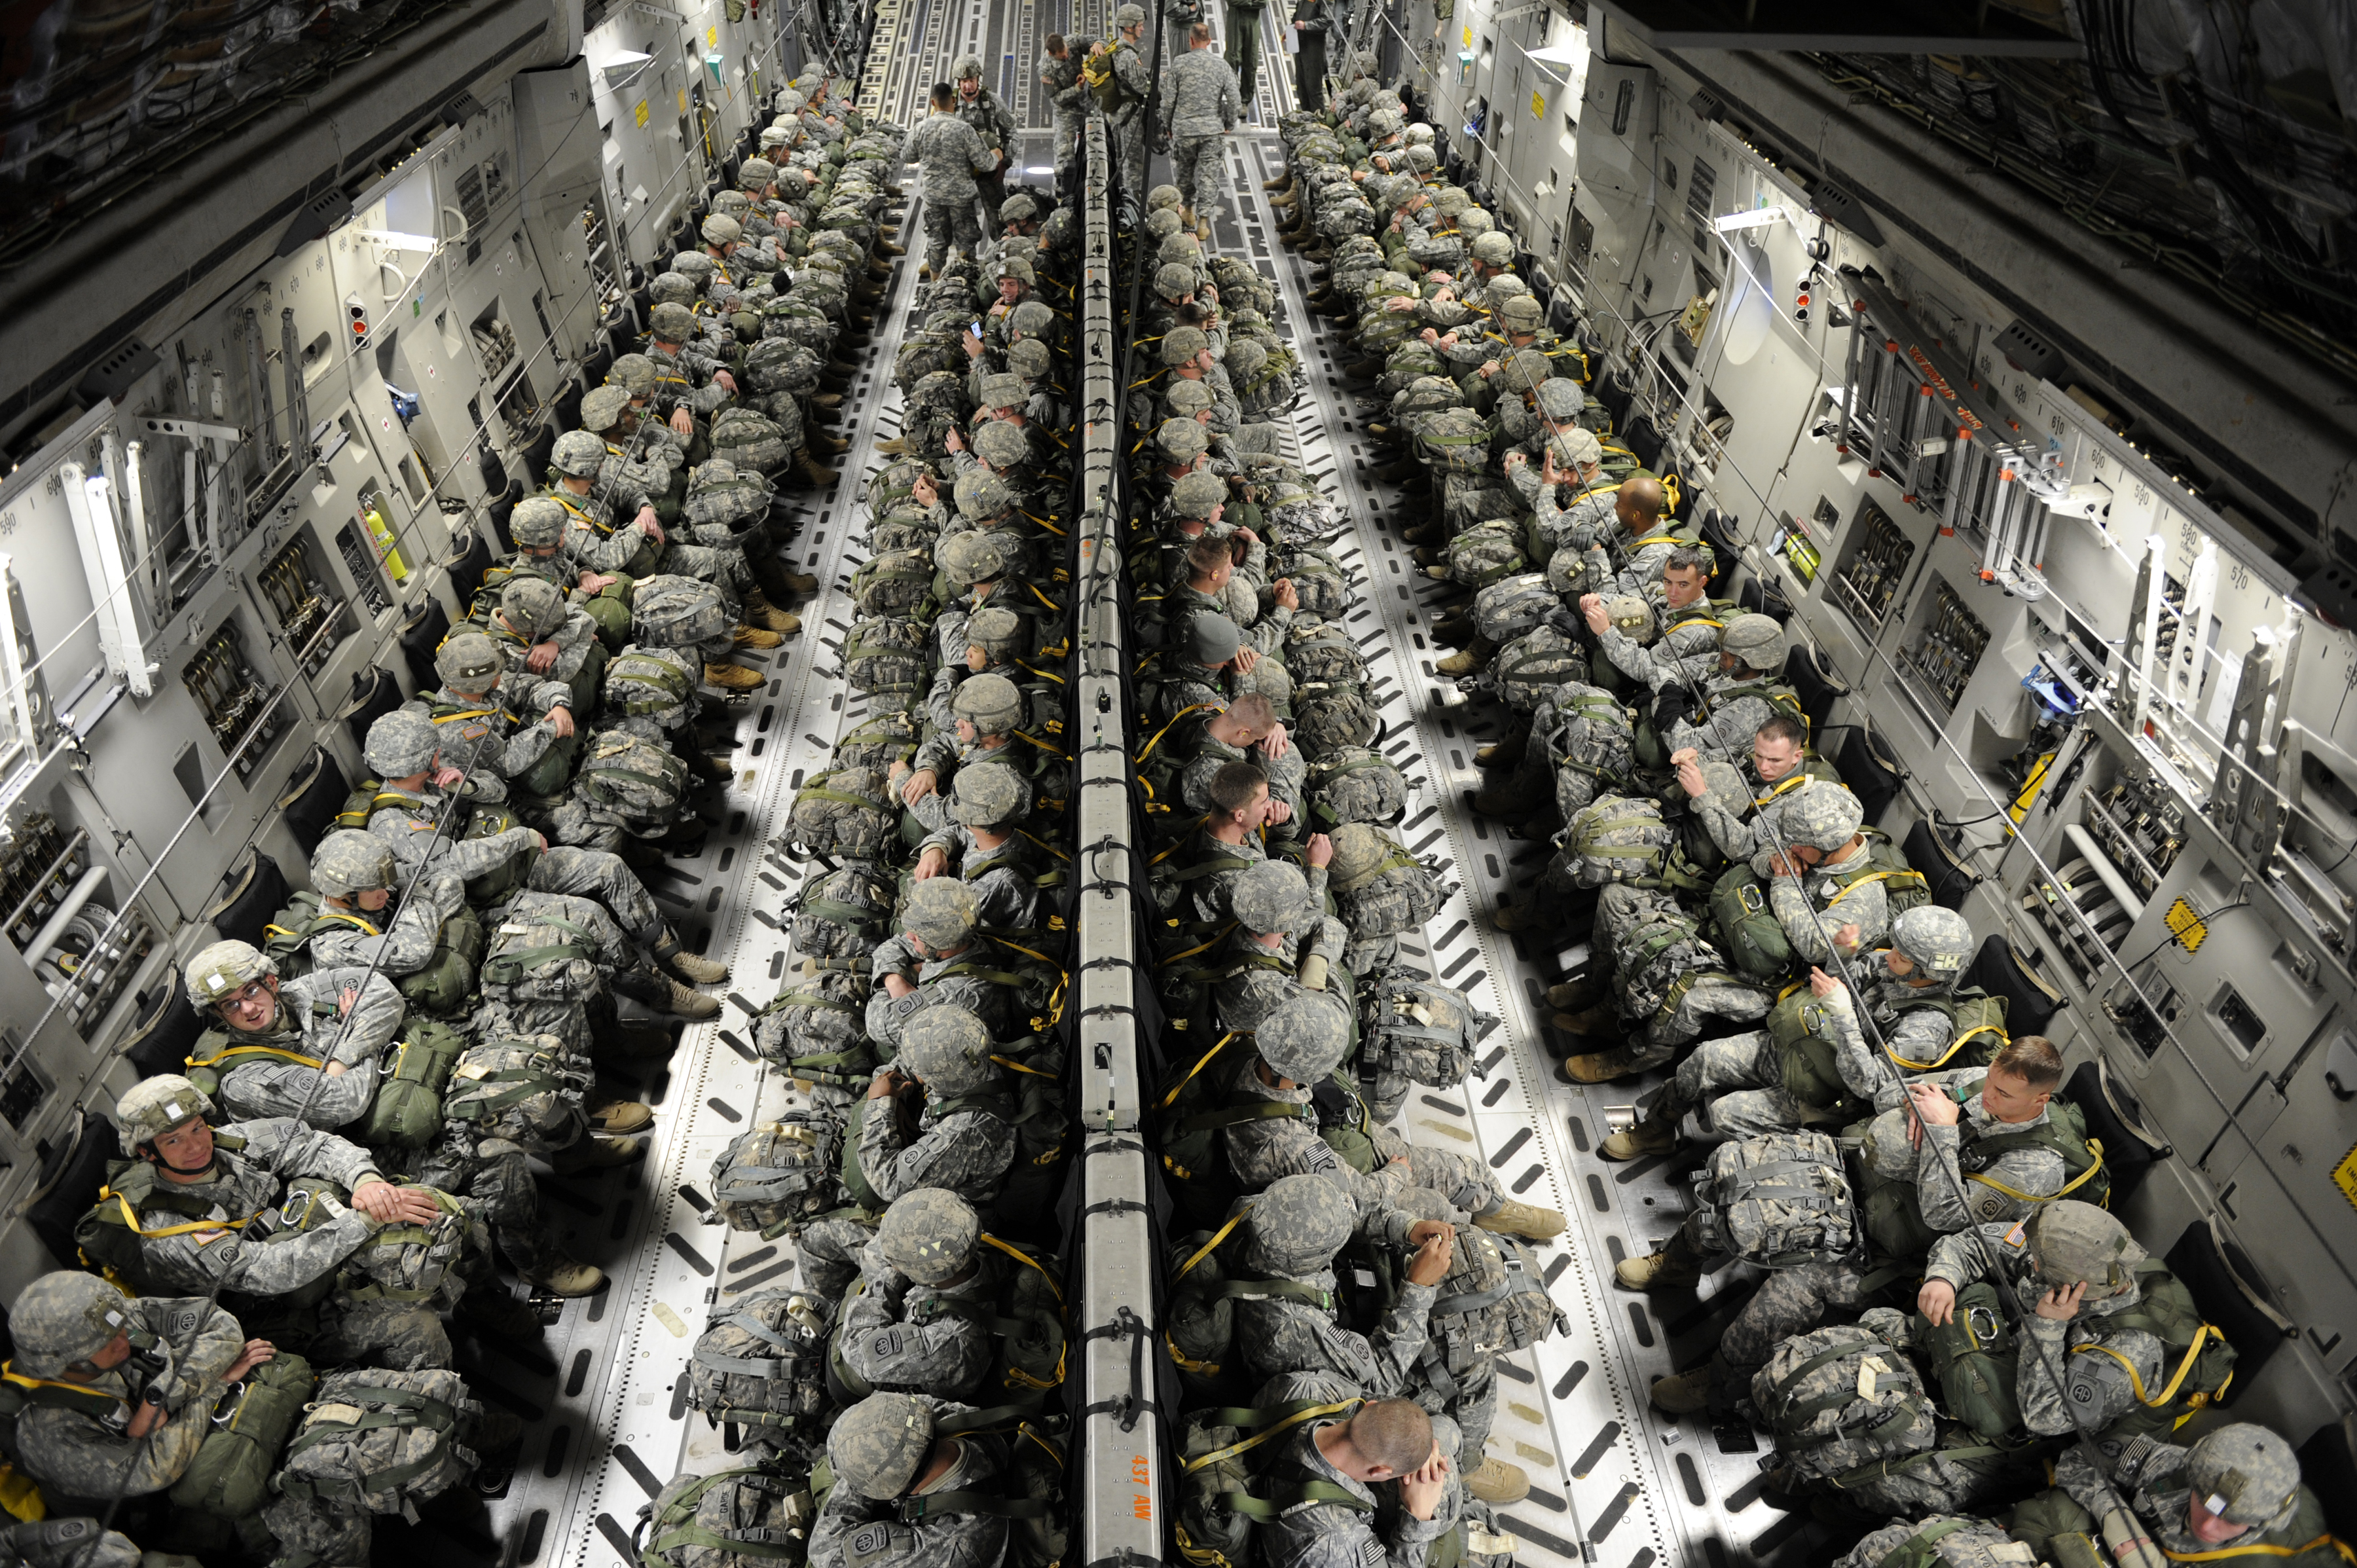 message-editor%2F1629078438256-82nd_airborne_paratroopers_in_a_c-17.jpg